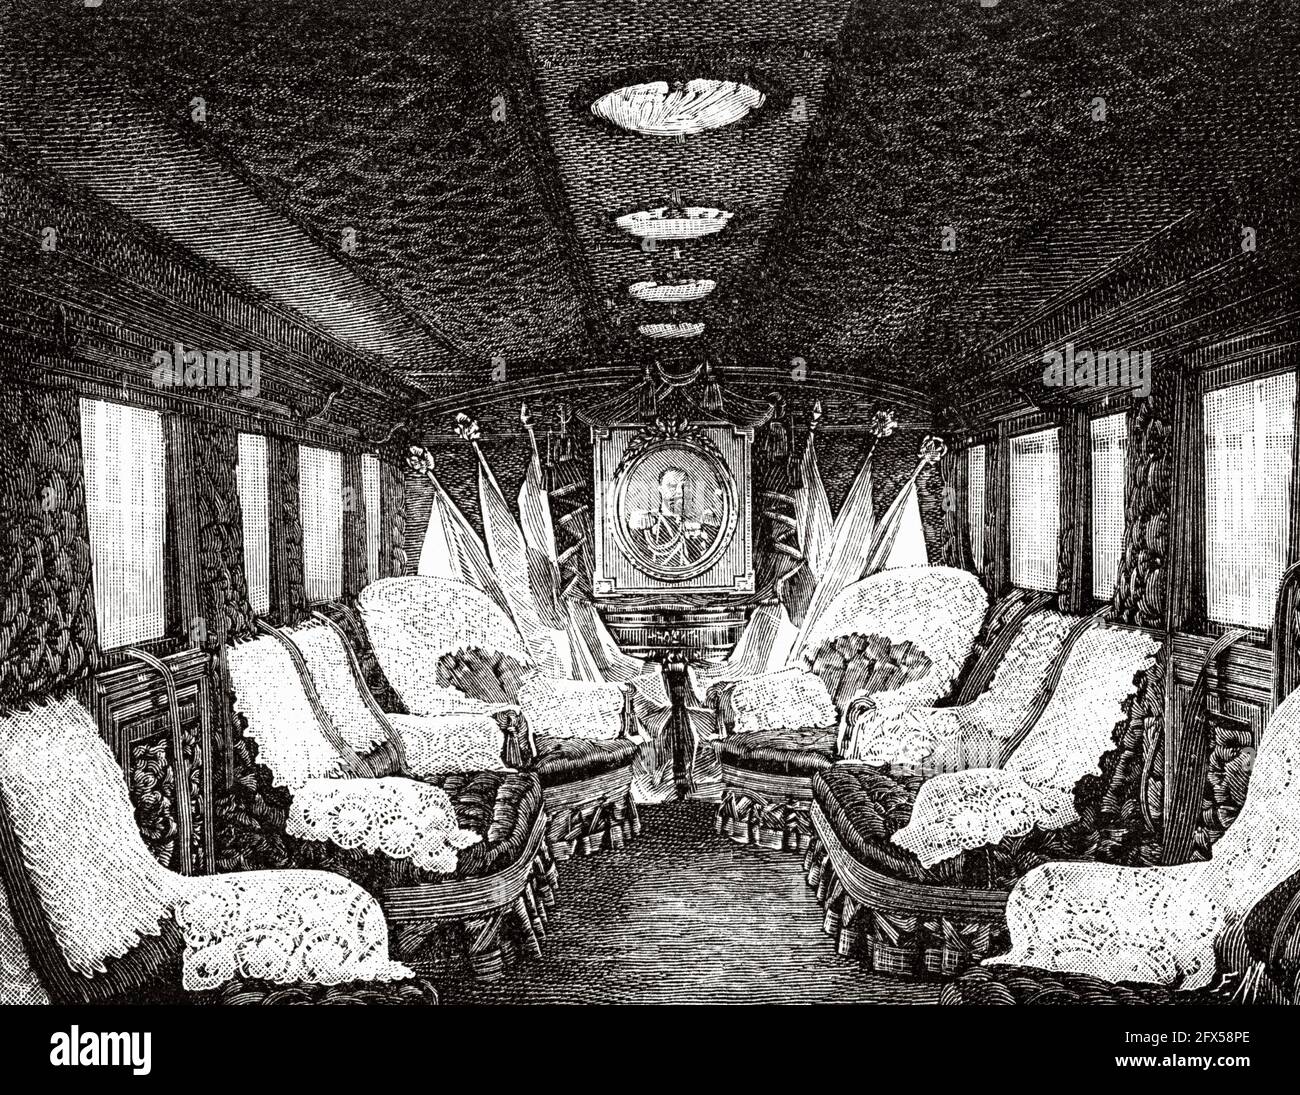 Interior of the wagon that took the Russian officers from Paris to Versailles on October 24, 1893 during the celebrations of the Franco-Russian alliance, Paris, France. Europe. Old 19th century engraved illustration from La Nature 1893 Stock Photo